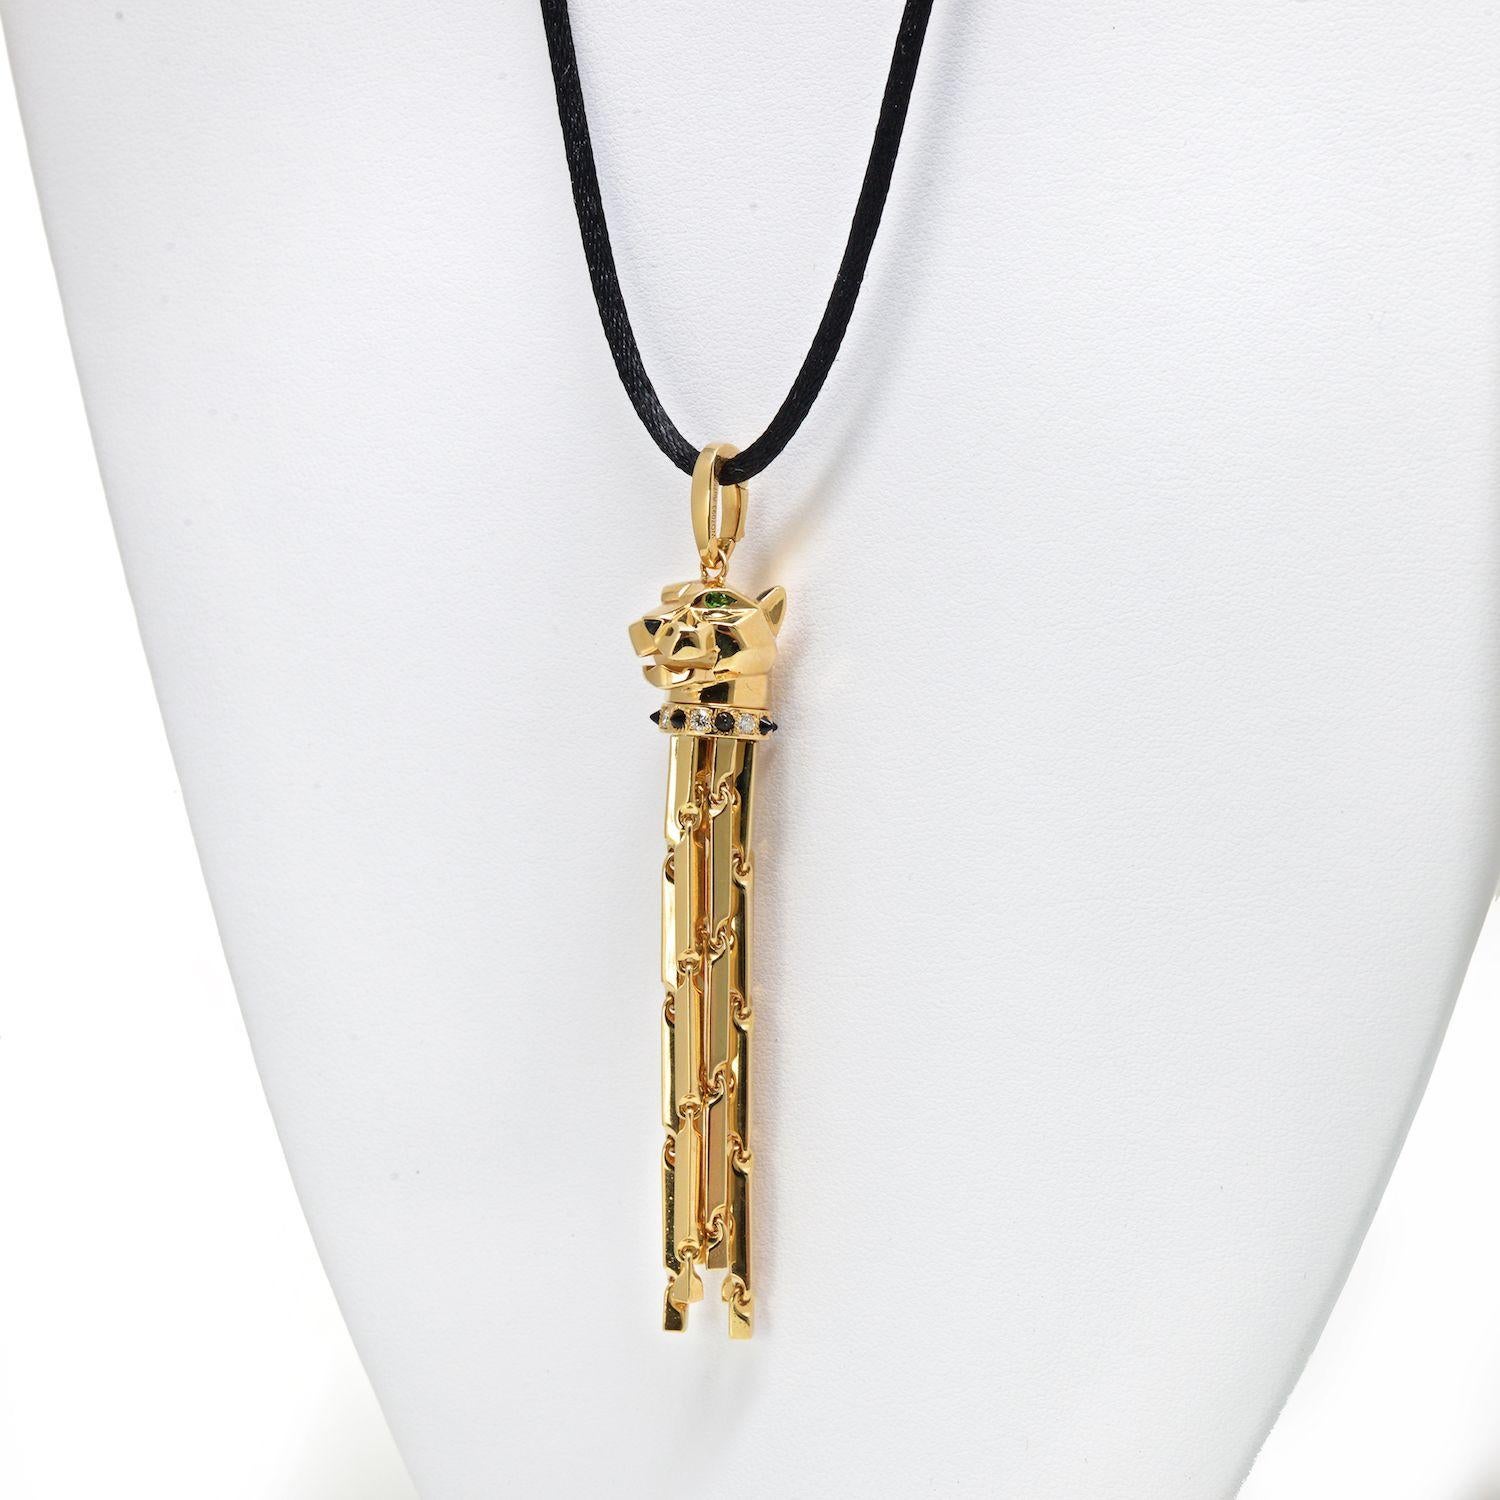 Cartier Panthere 18k Yellow Gold on a Black Cord Pendant In Excellent Condition For Sale In New York, NY